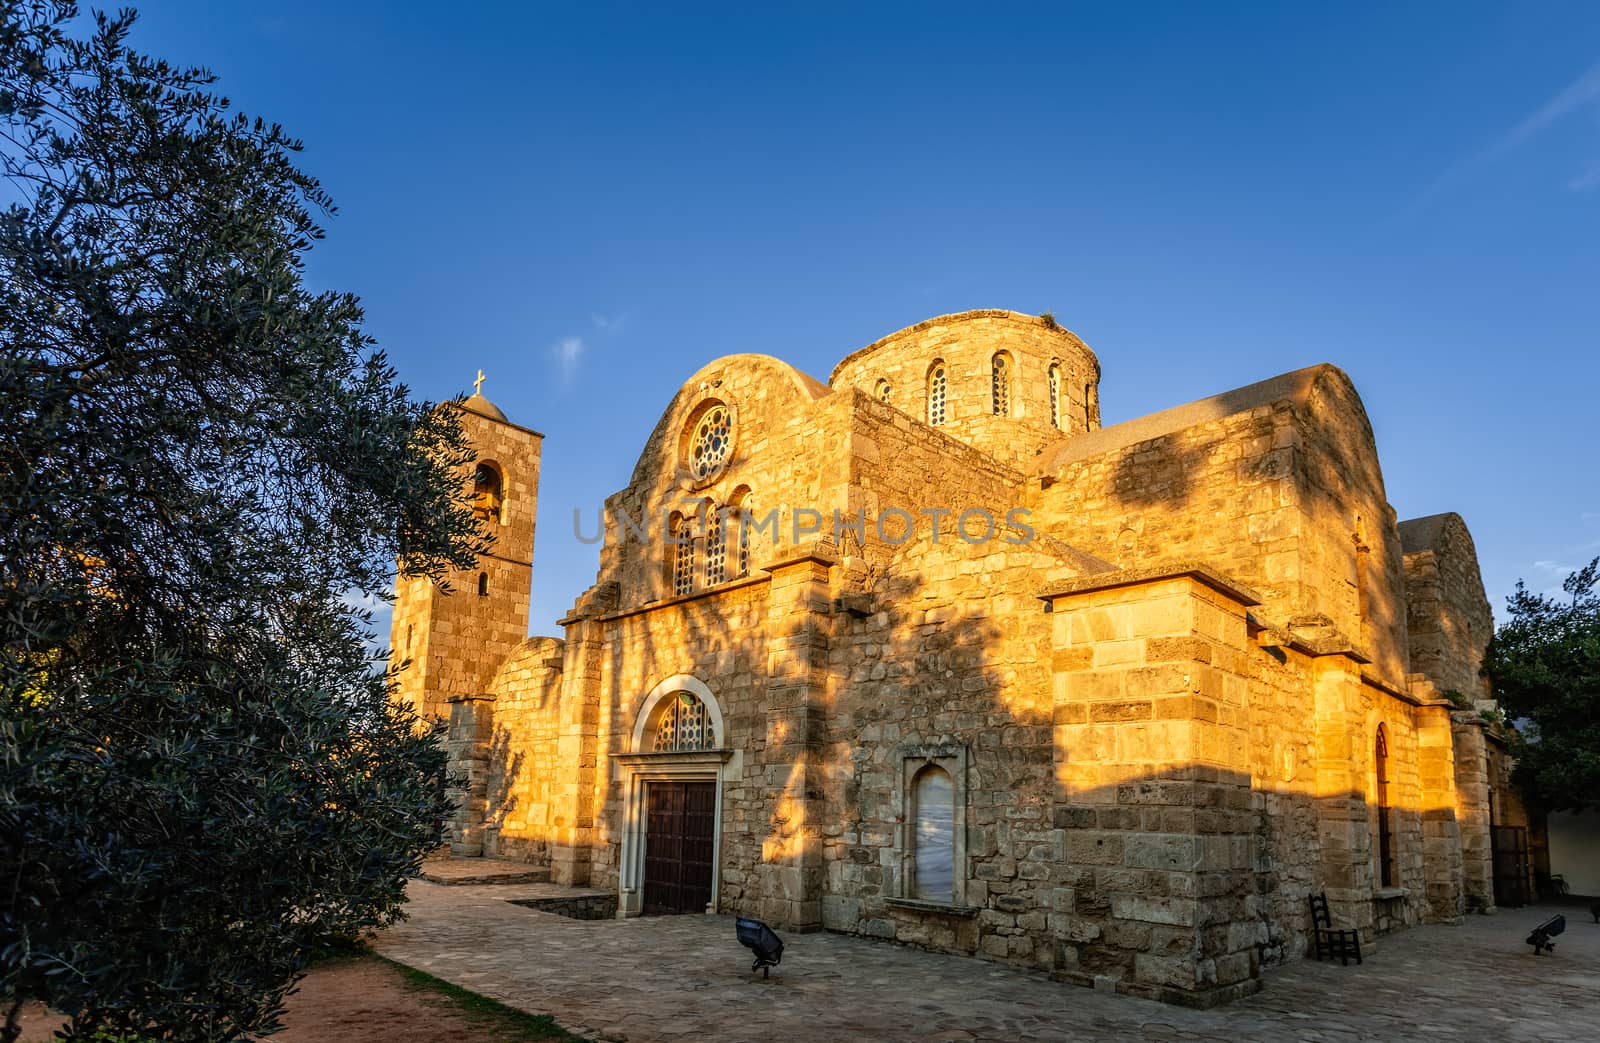 Saint apostle Barnabas monastery and the bell tower in sunset rays, near Famagusta, North Cyprus